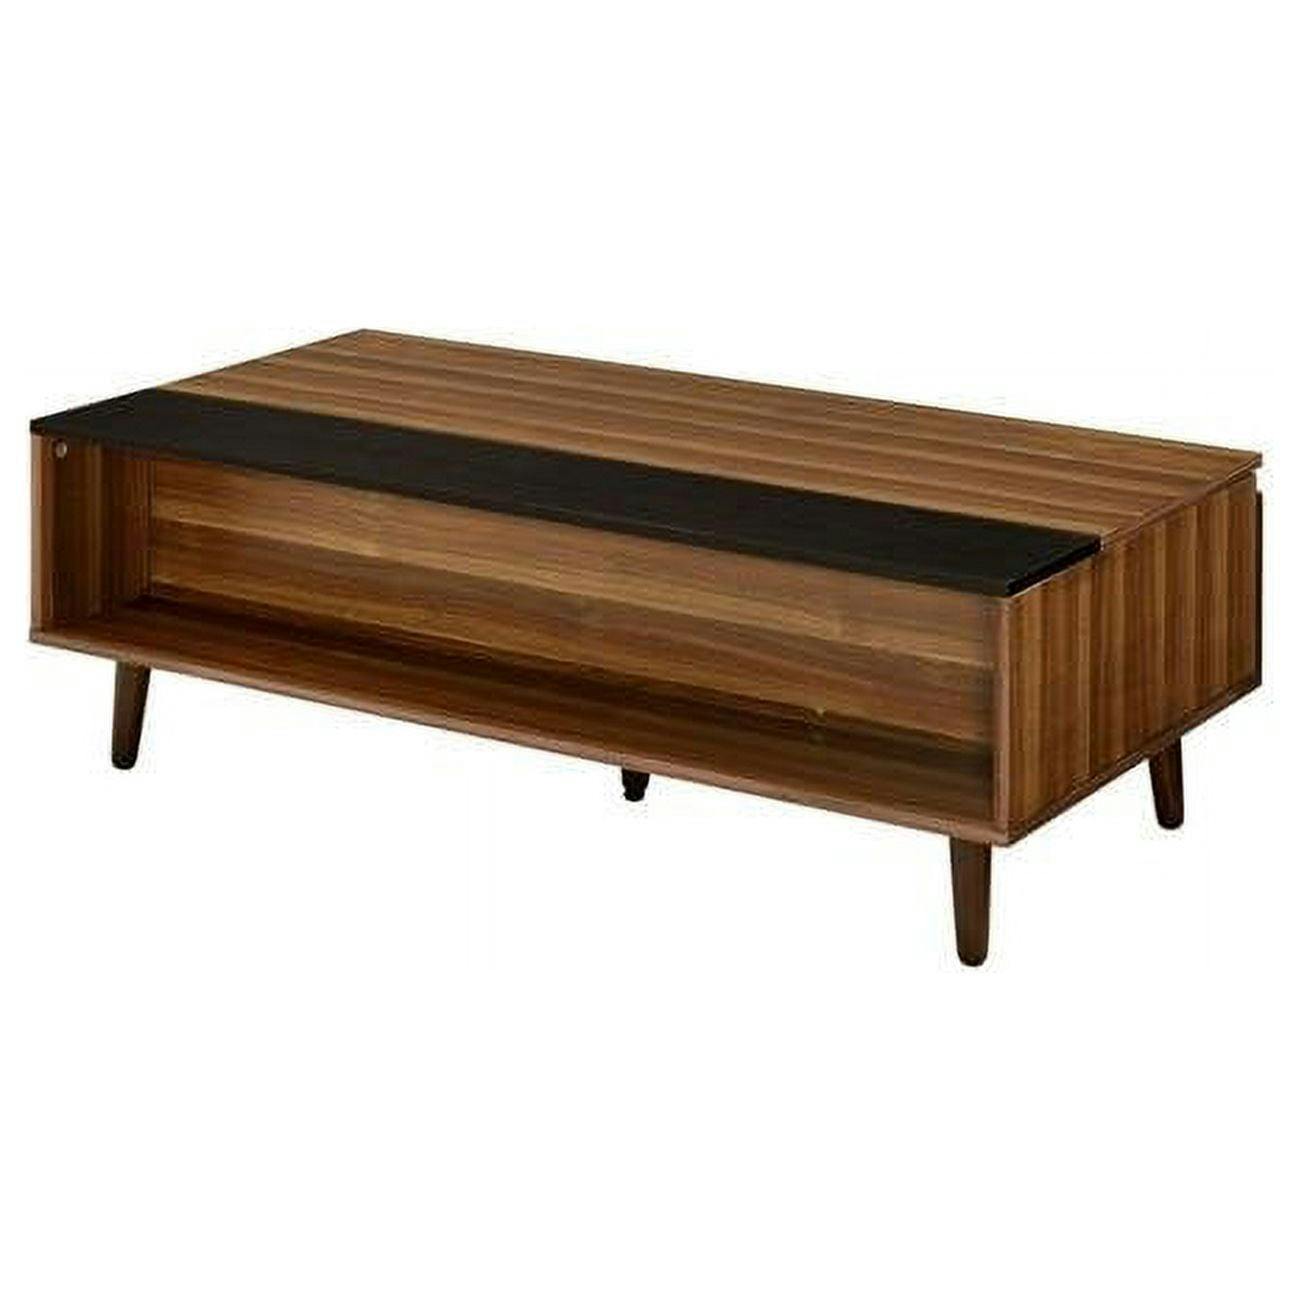 Walnut Brown Rectangular Lift-Top Coffee Table with Storage